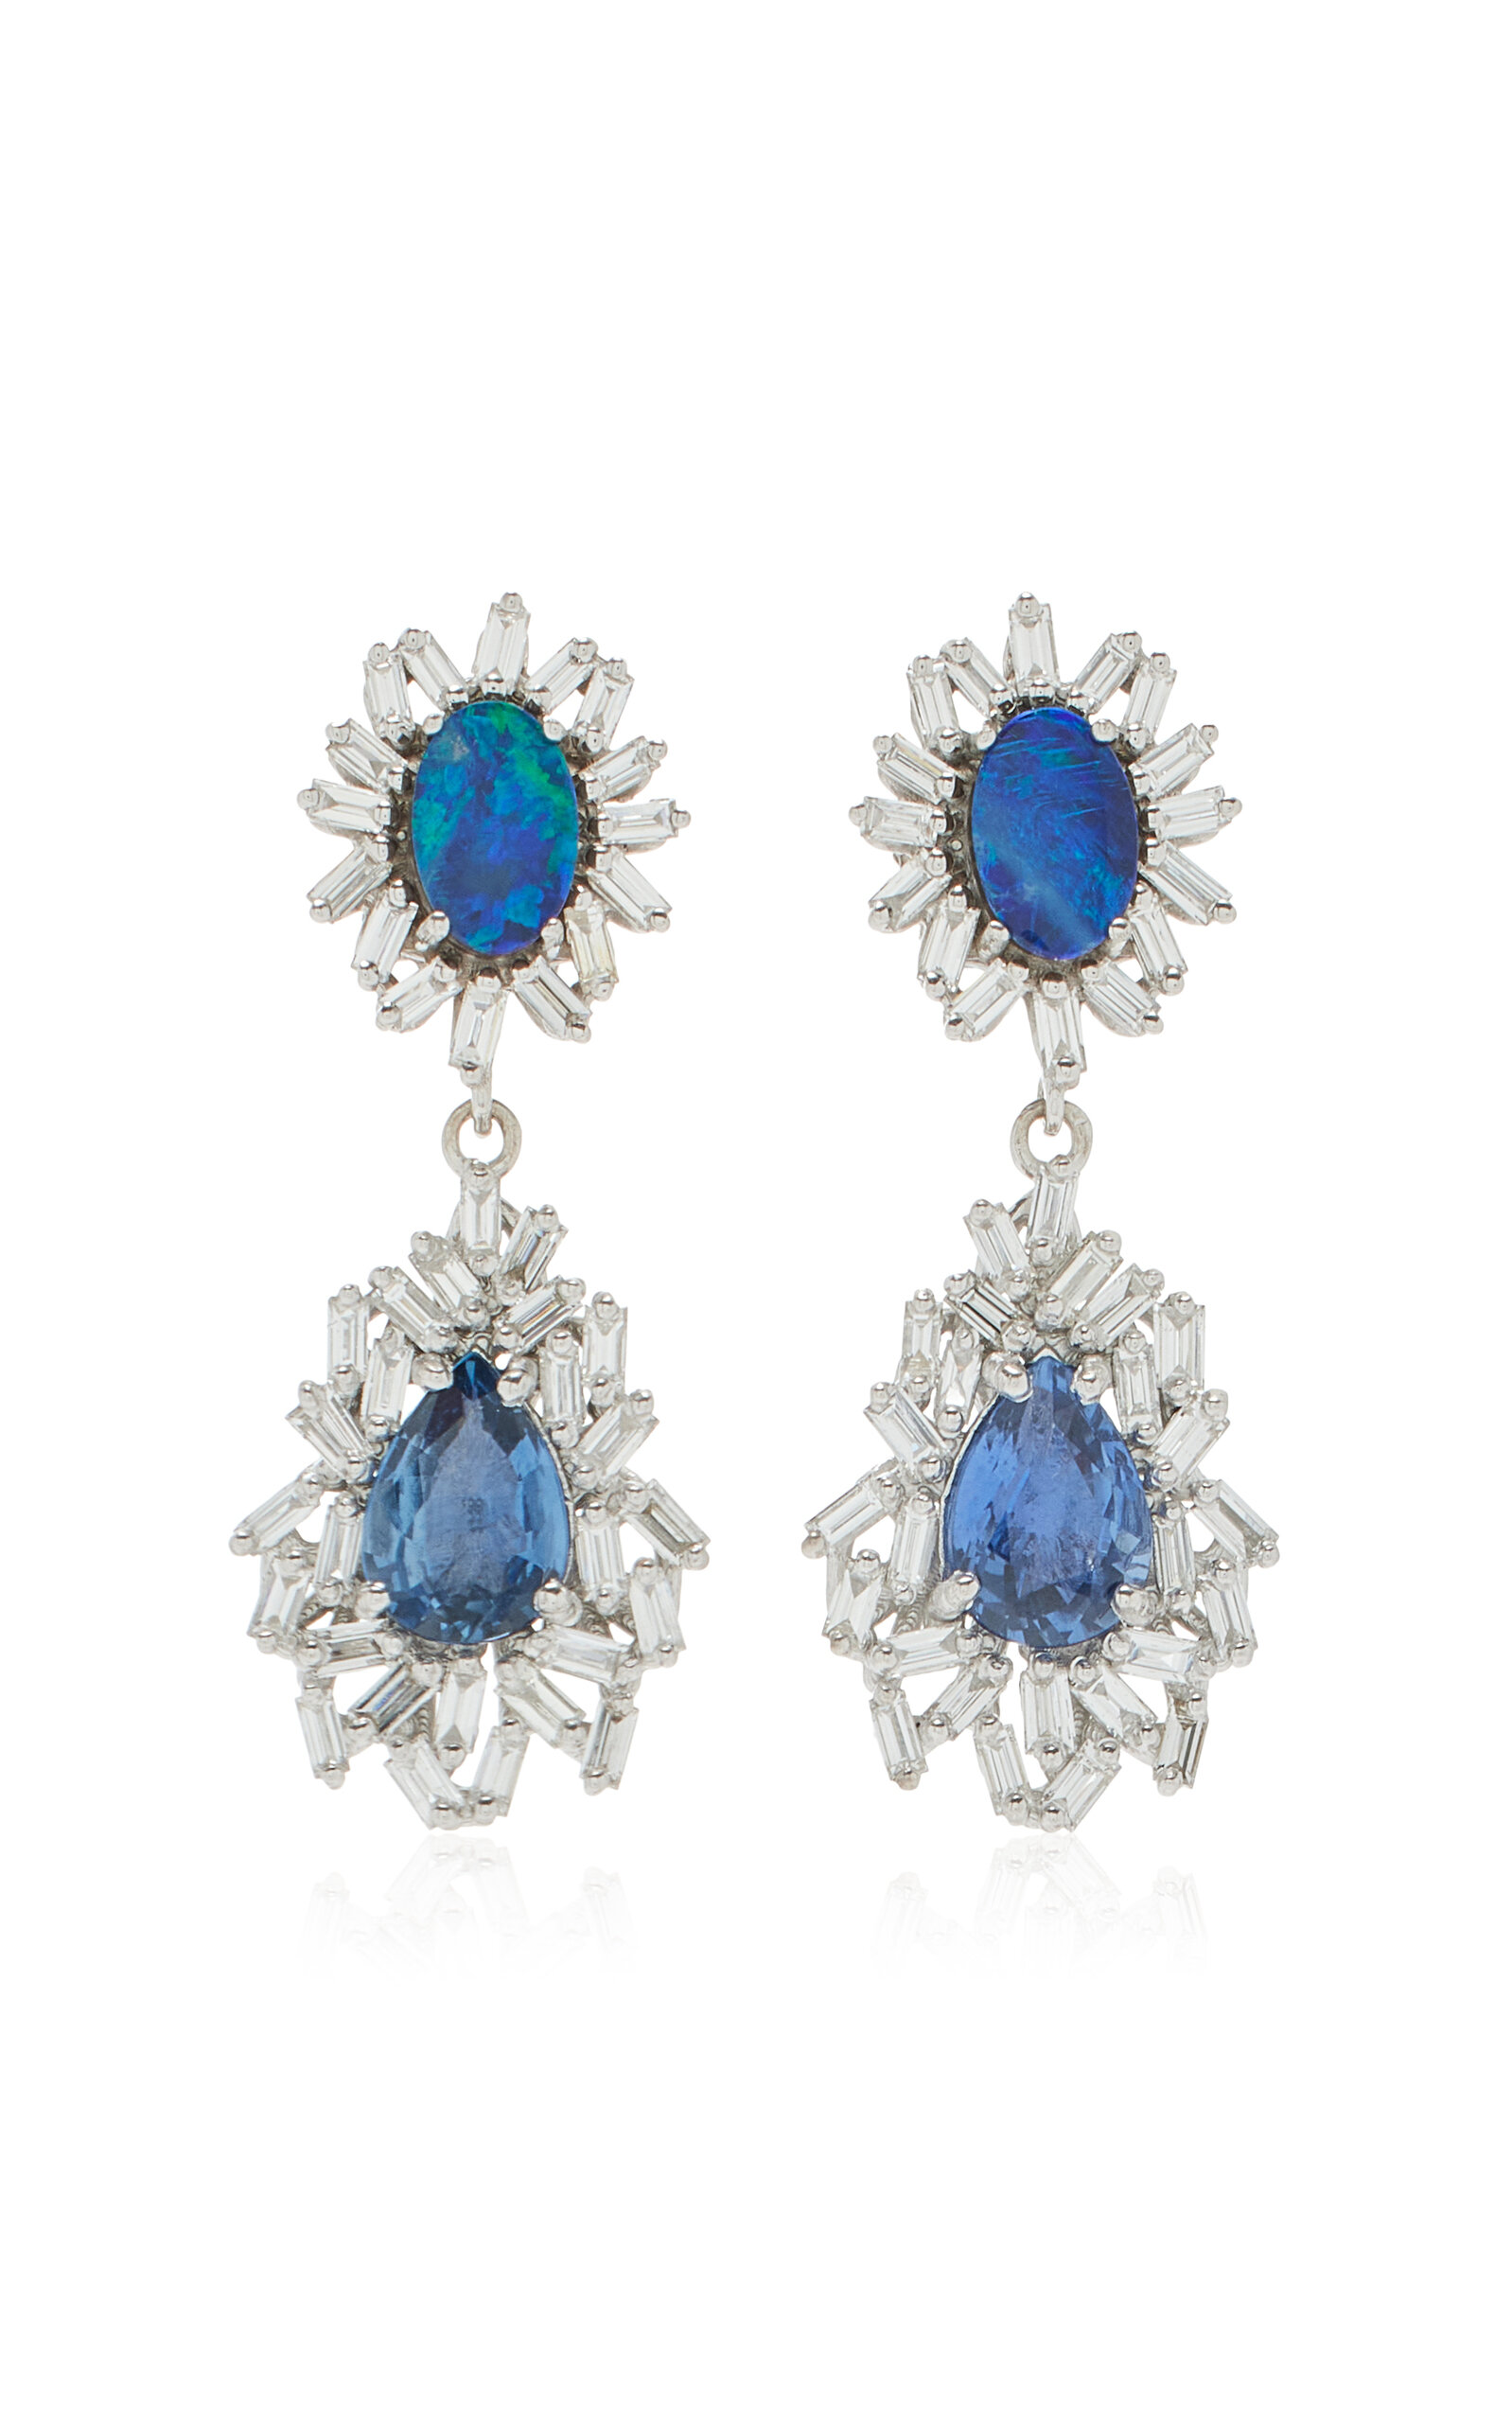 Suzanne Kalan One-of-a-kind 18k White Gold Sapphire; Opal And Diamond Earrings In Blue